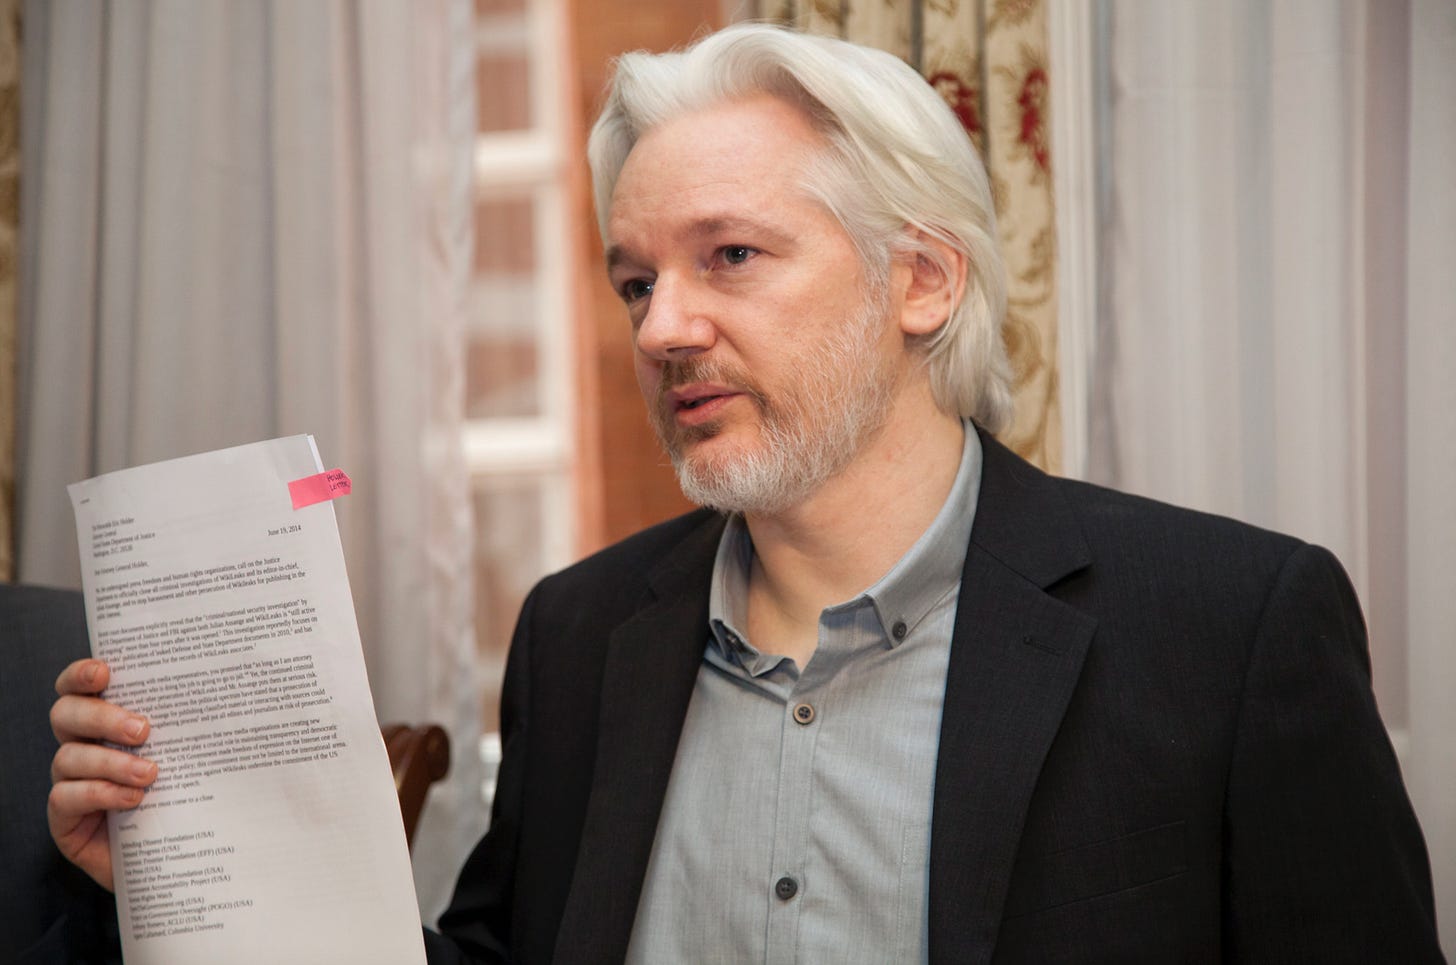 WikiLeaks publisher Julian Assange, waring a gray shirt and suit jacket, holds a document in his hands. 